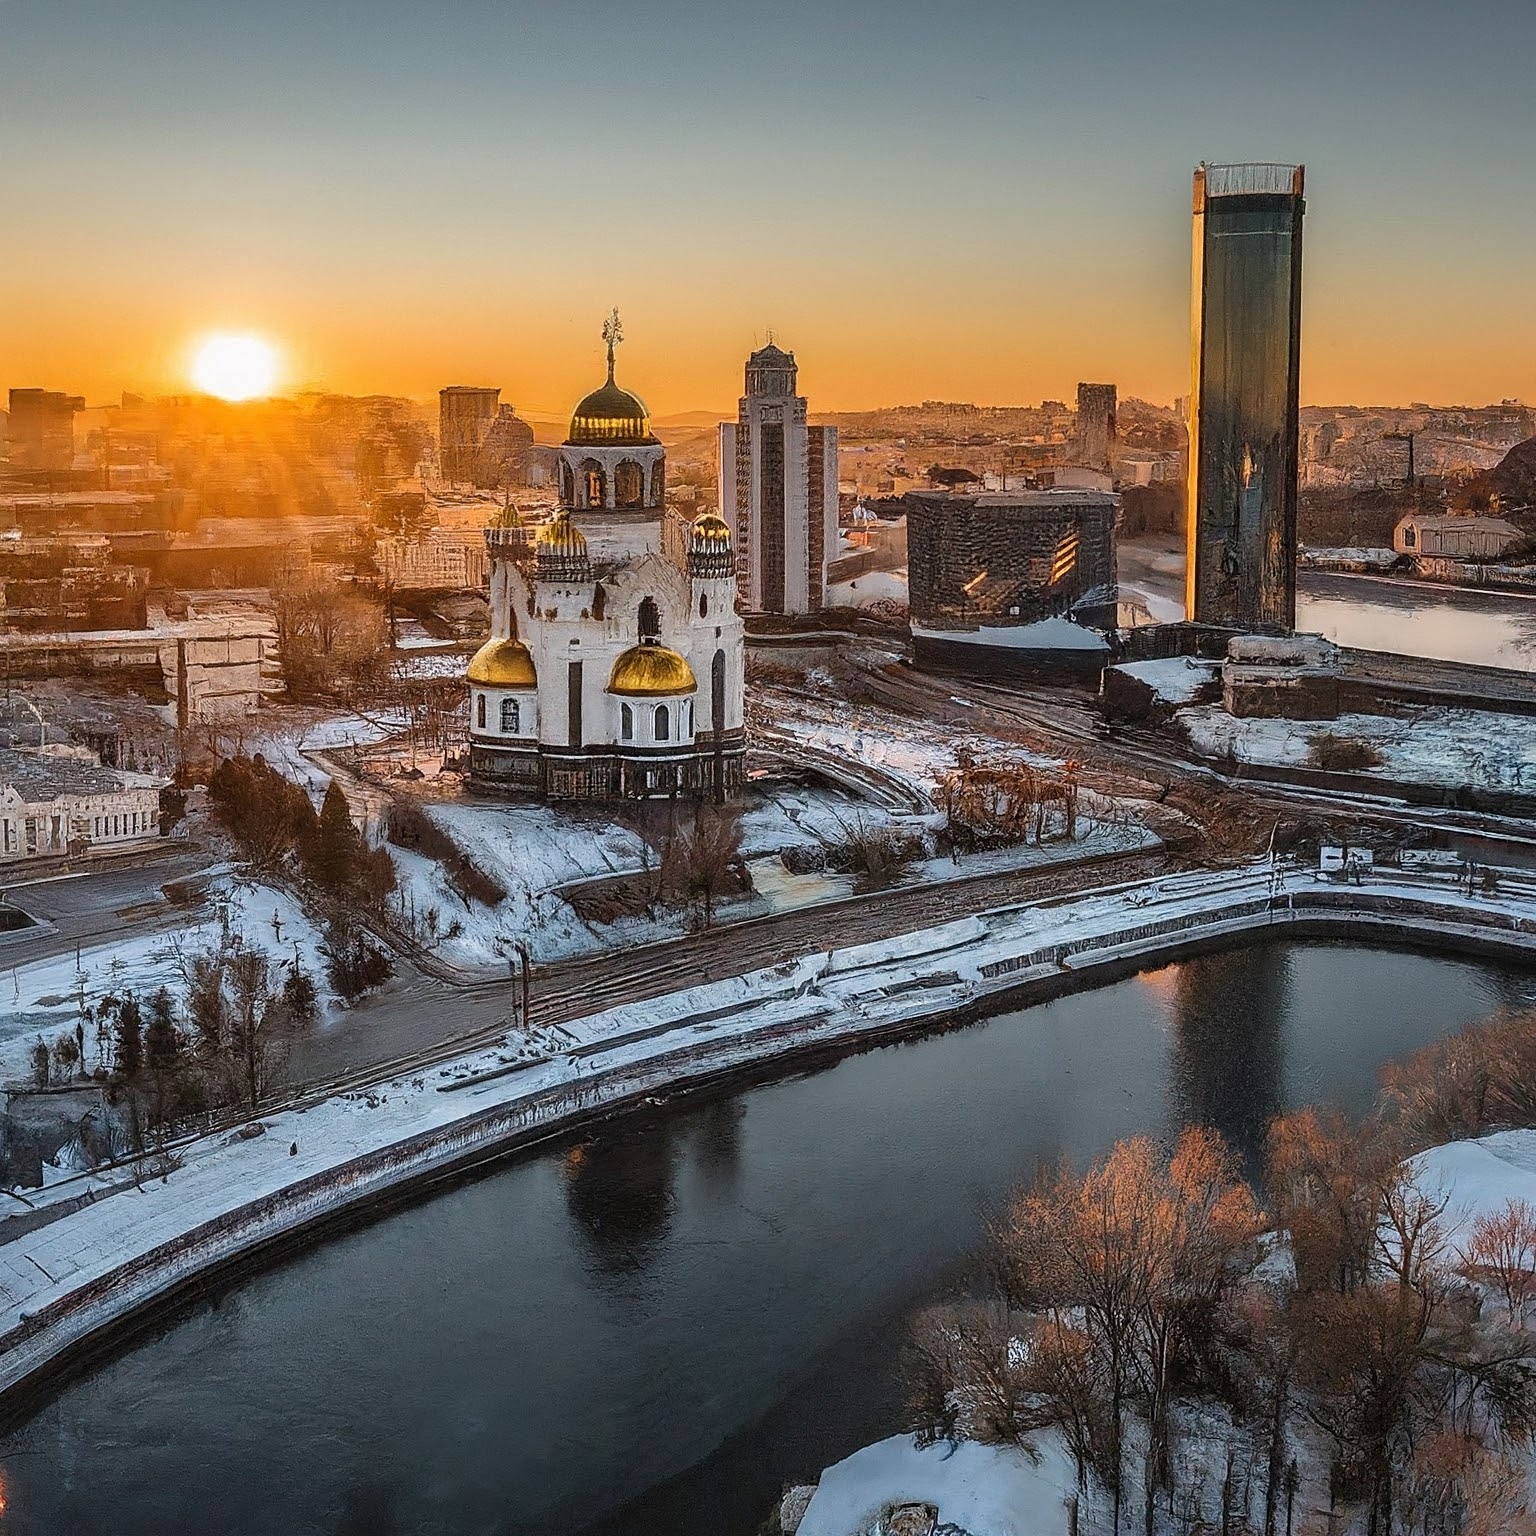 Sunset view of Yekaterinburg, Russia, with the Church on the Blood and Iset River.